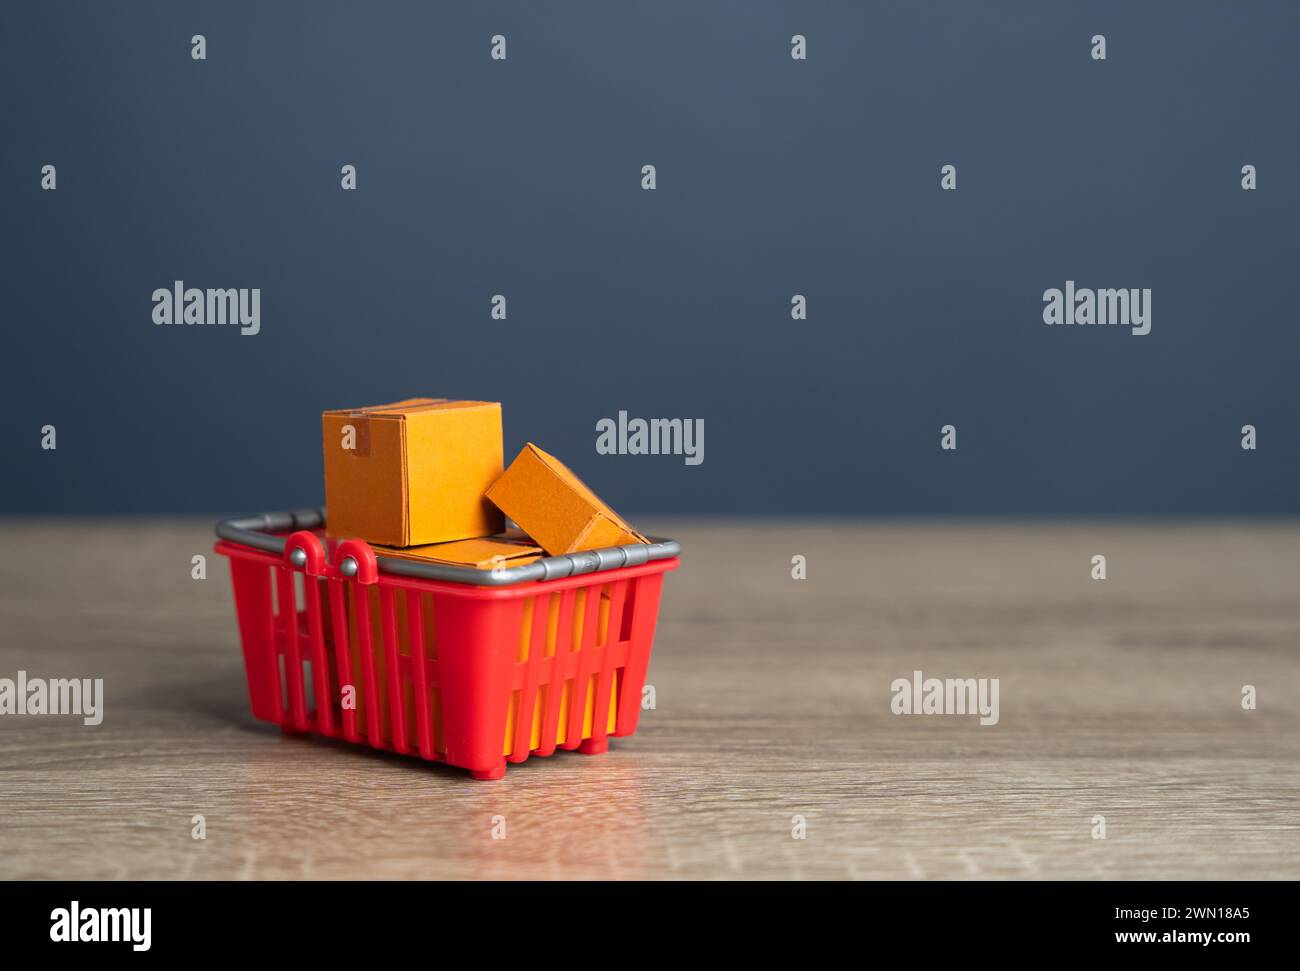 Shopping basket. Purchasing power. Inflation and taxes. Standard of living. Economic well-being. Stock Photo